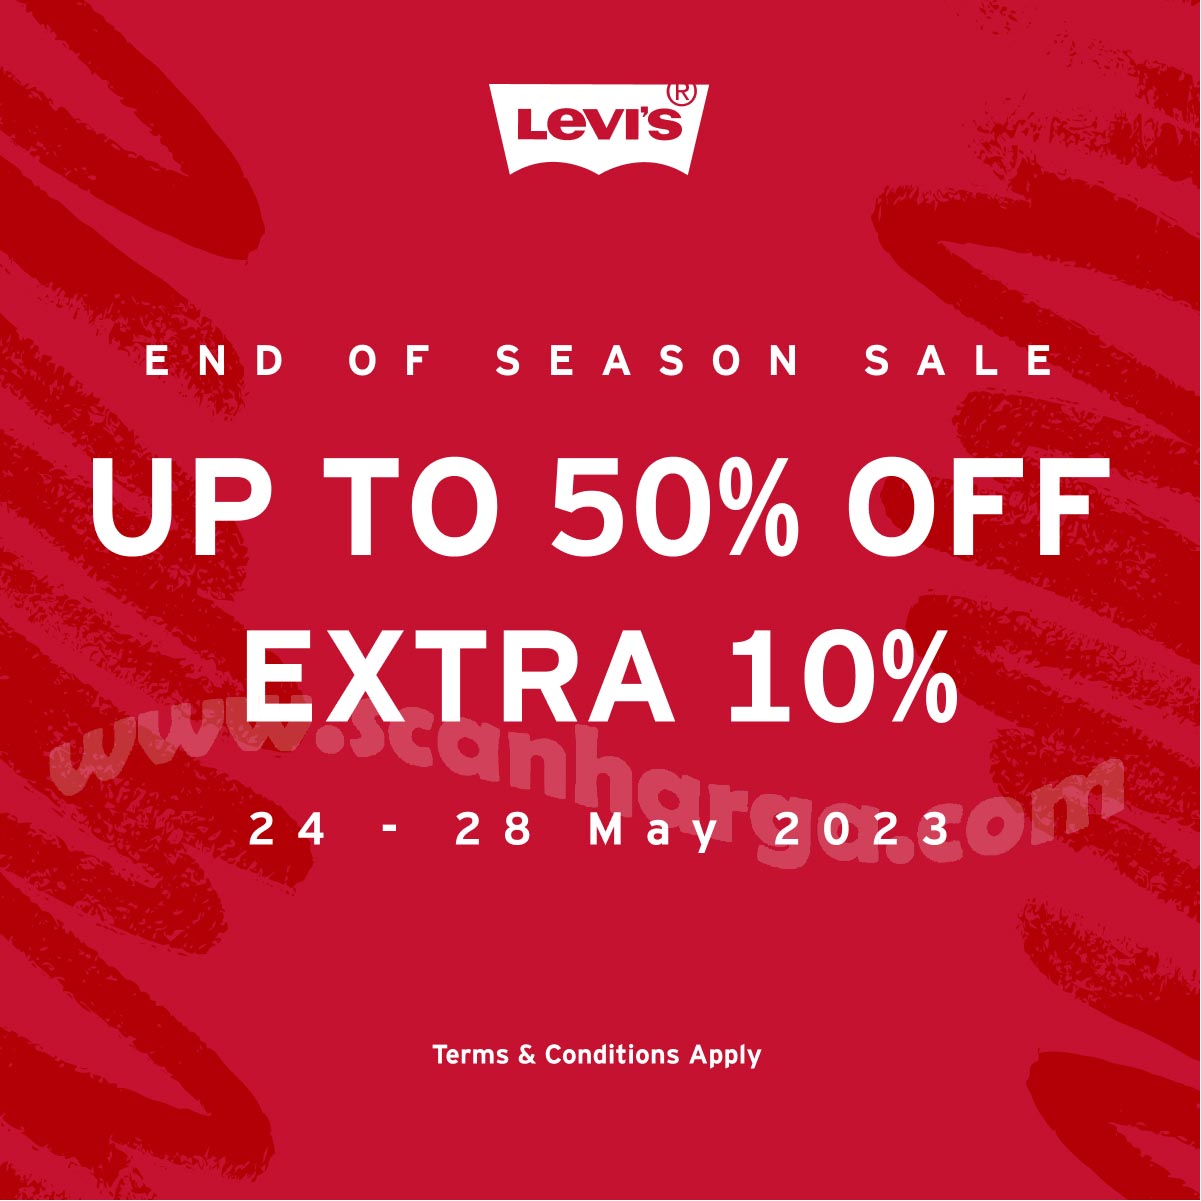 Promo Levi's End Of Season Sale Up to 50% Off